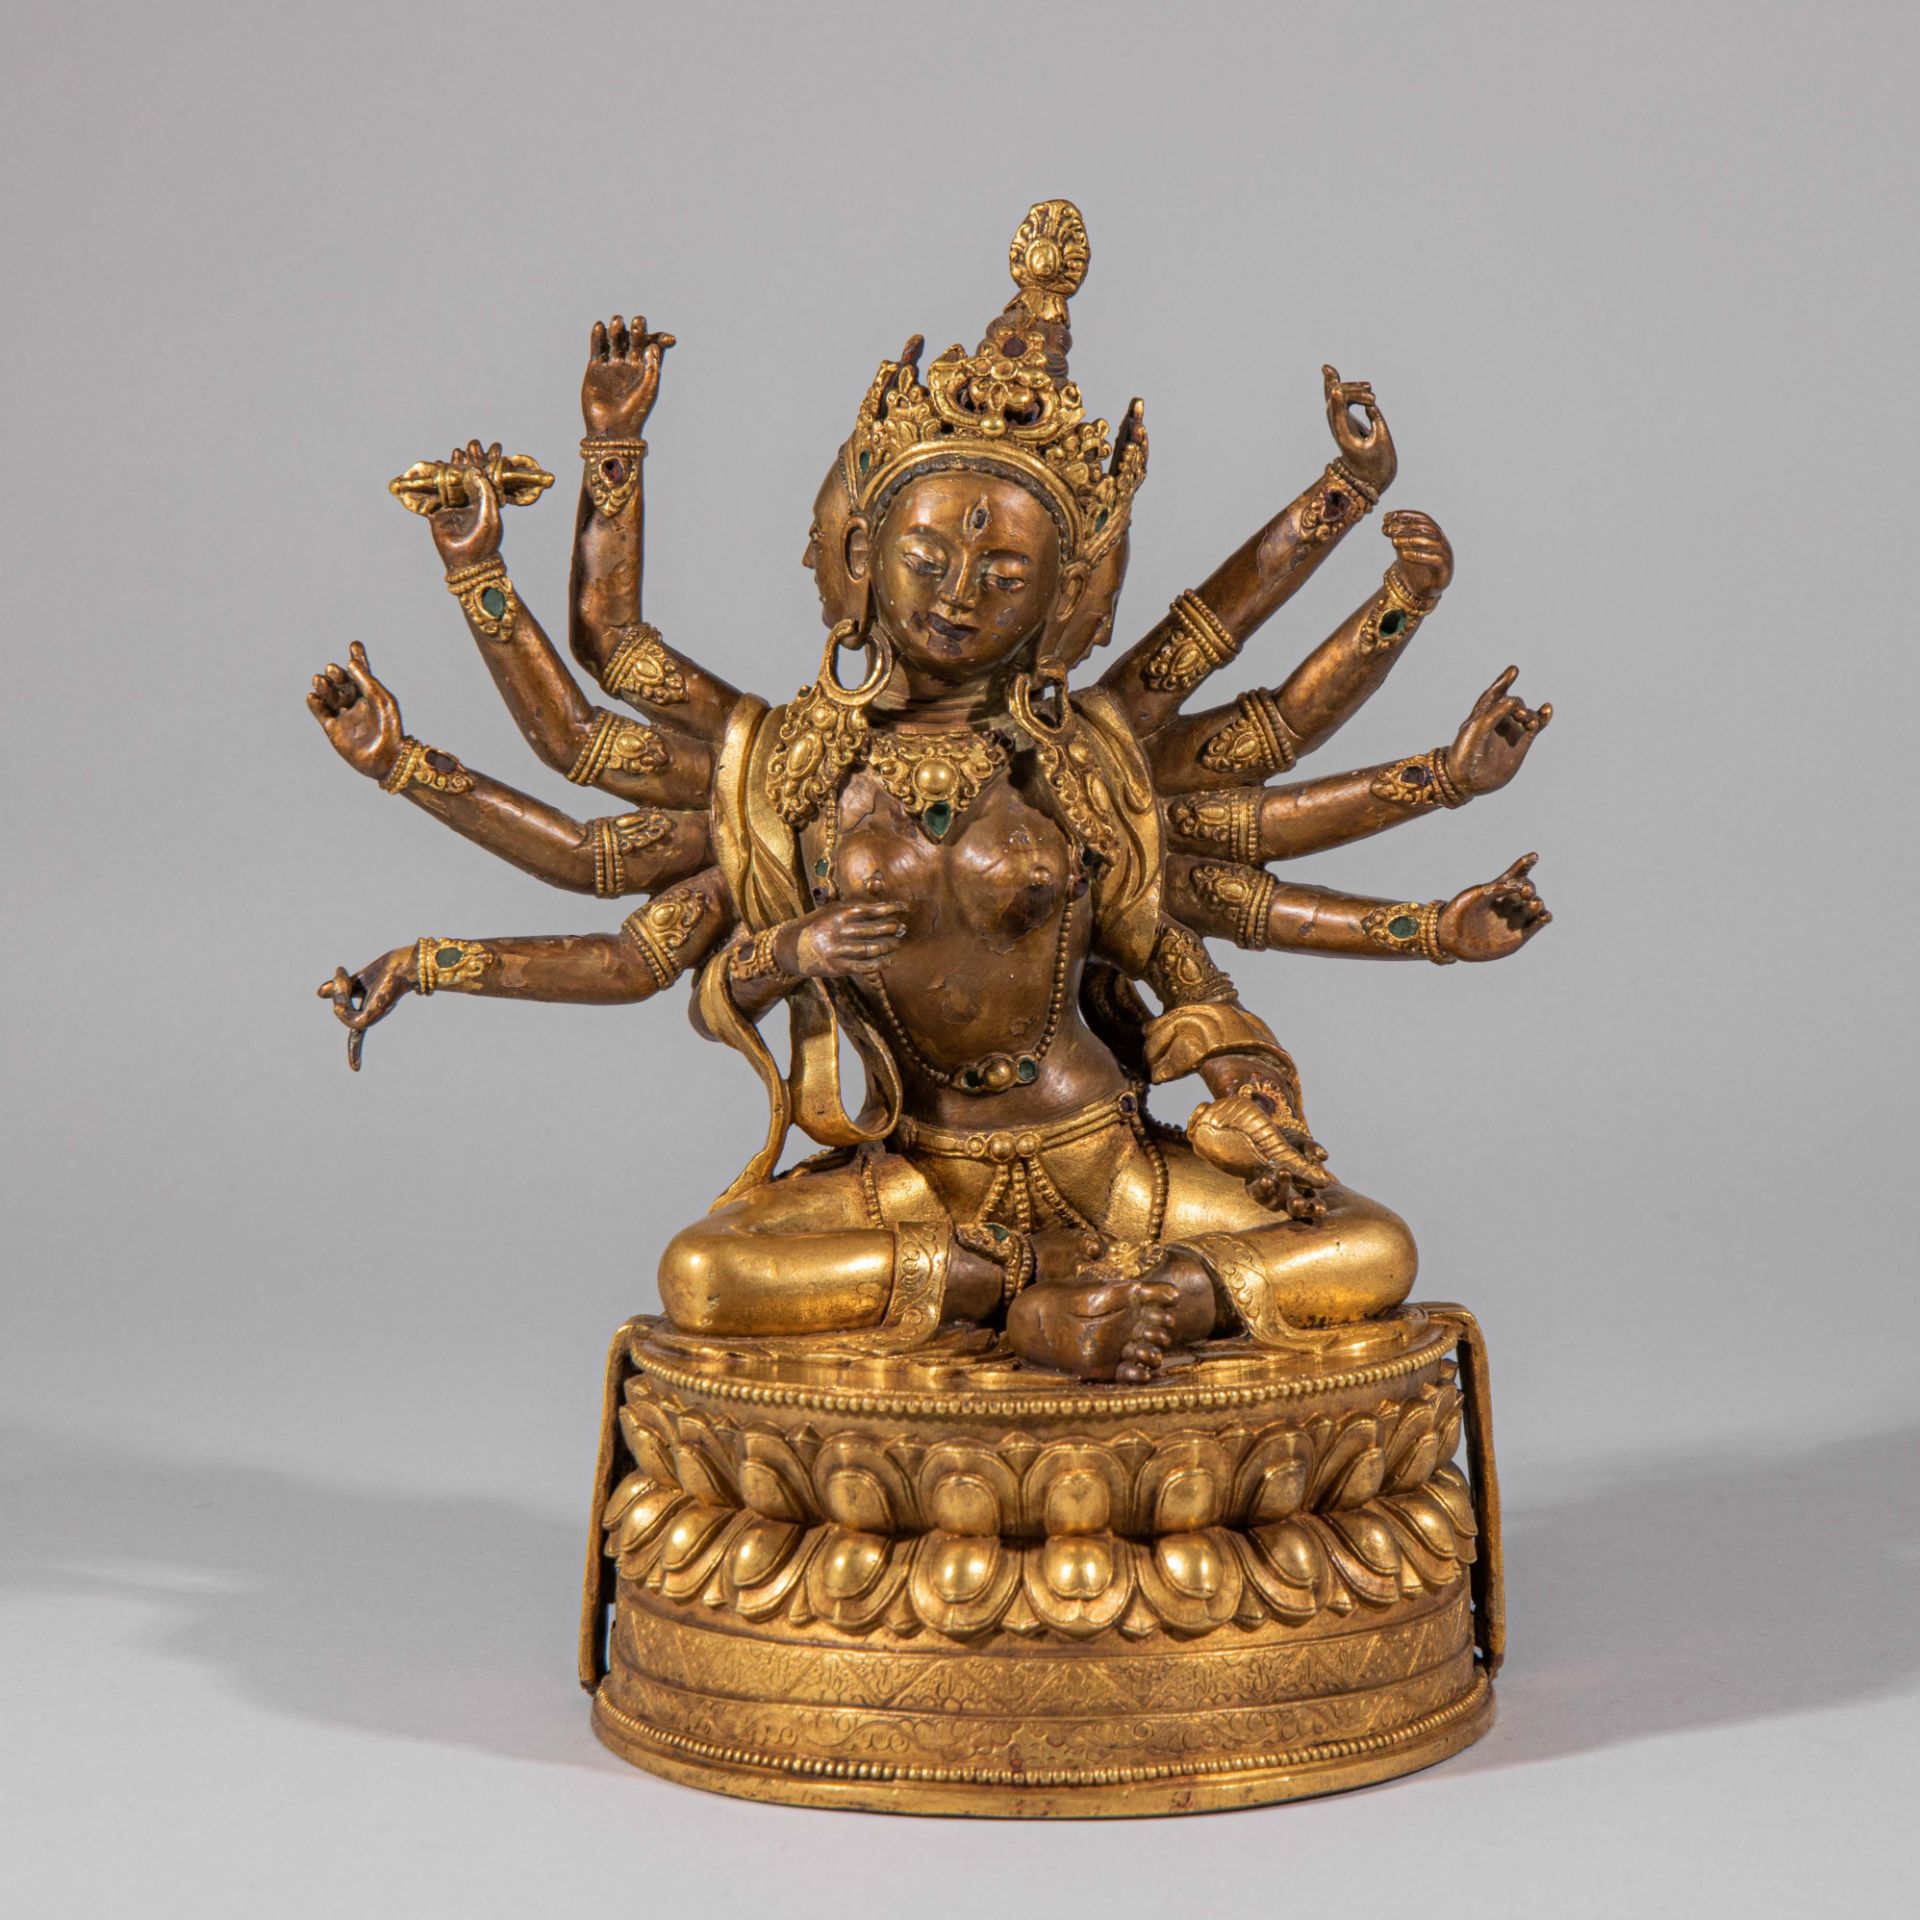 A Gilt Bronze Statue of Guanyin with Ten Arms, Qing Dynasty, China